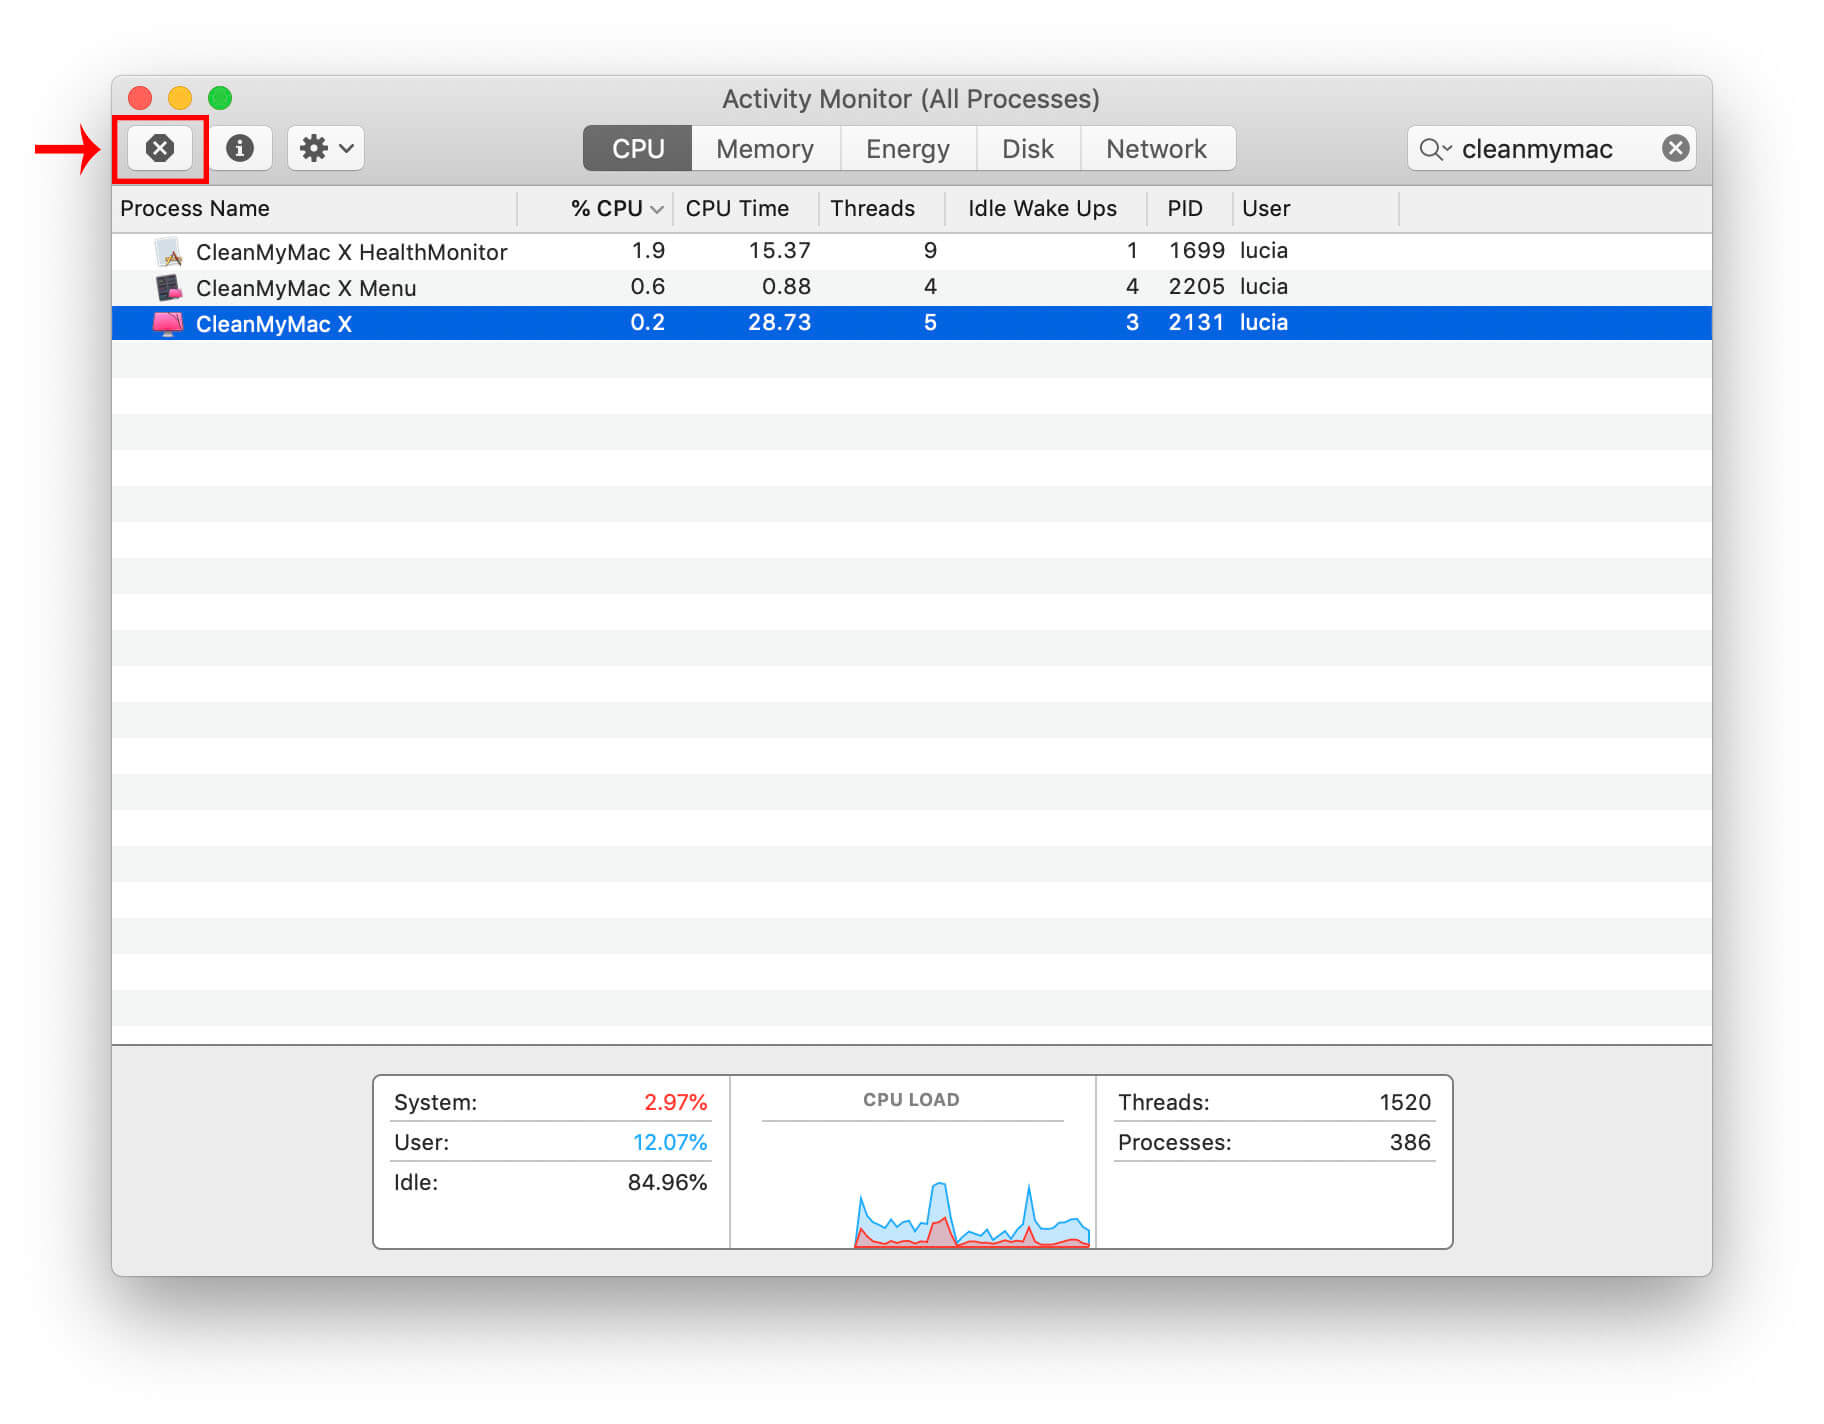 activity monitor window - closing cleanmymac processes